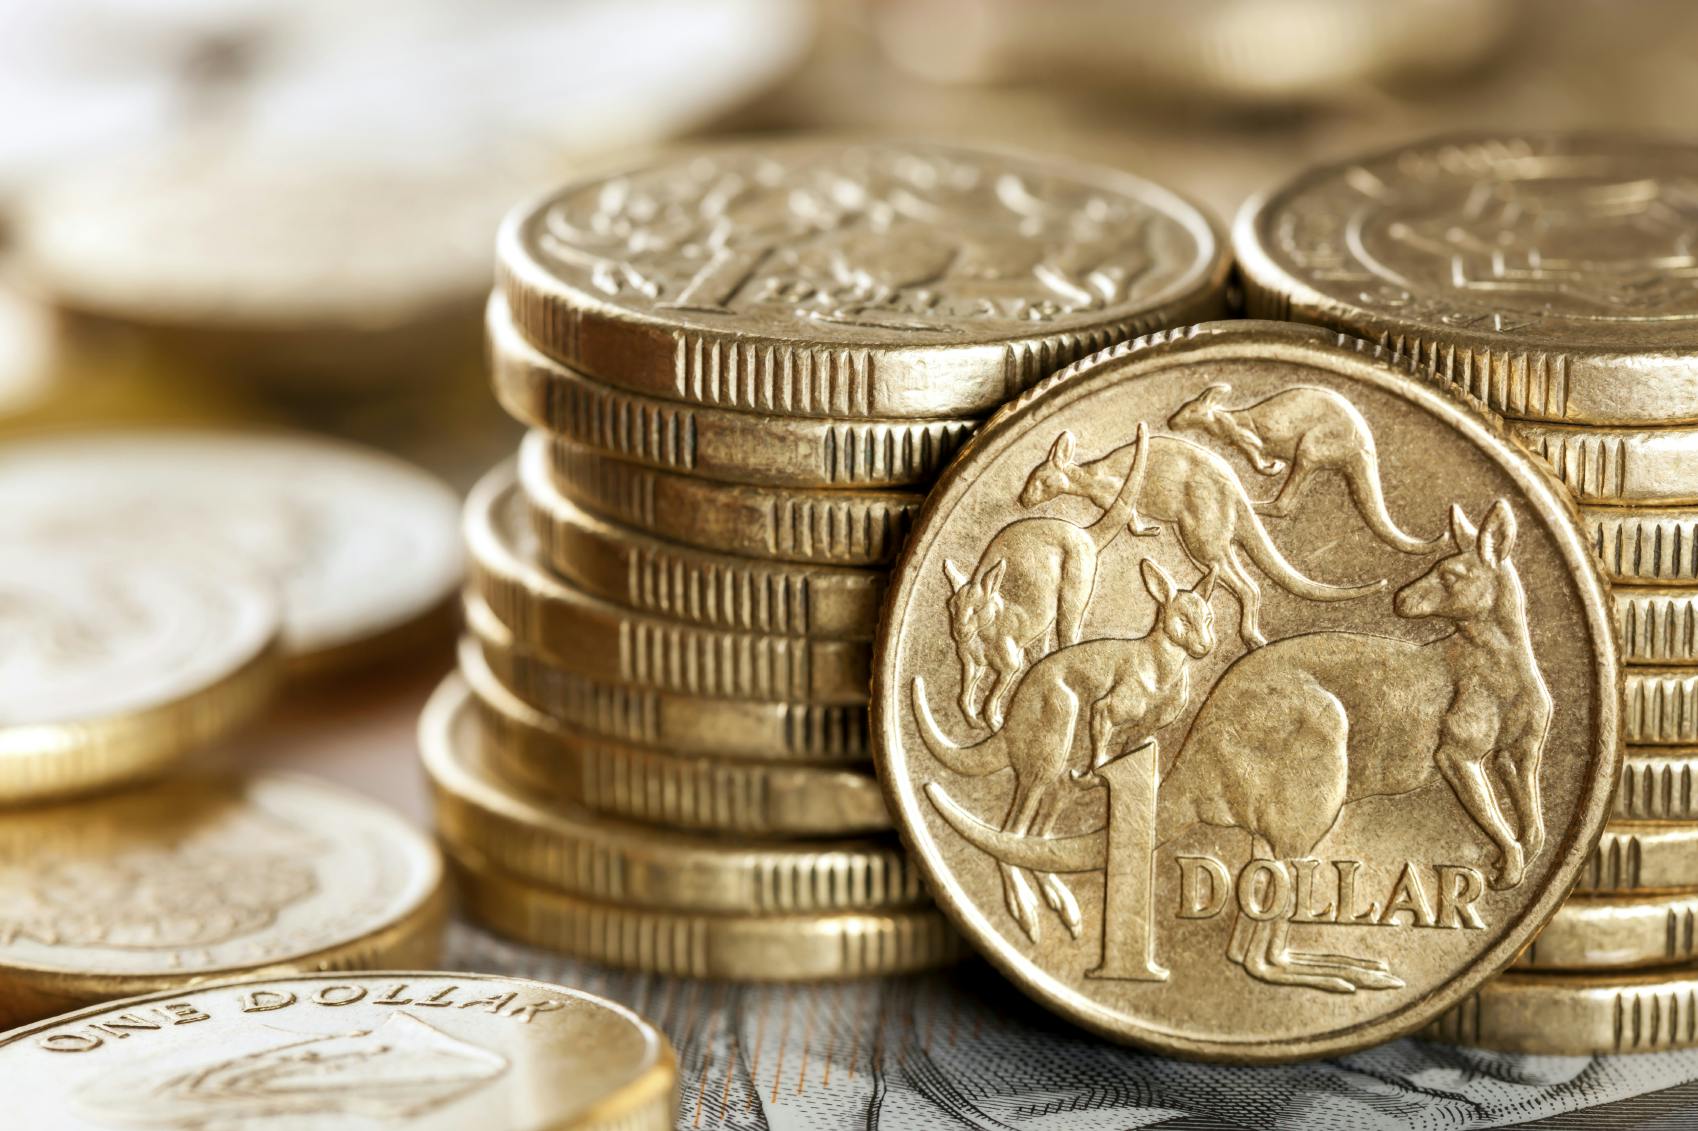 Aussie Dollar has biggest fall in five years